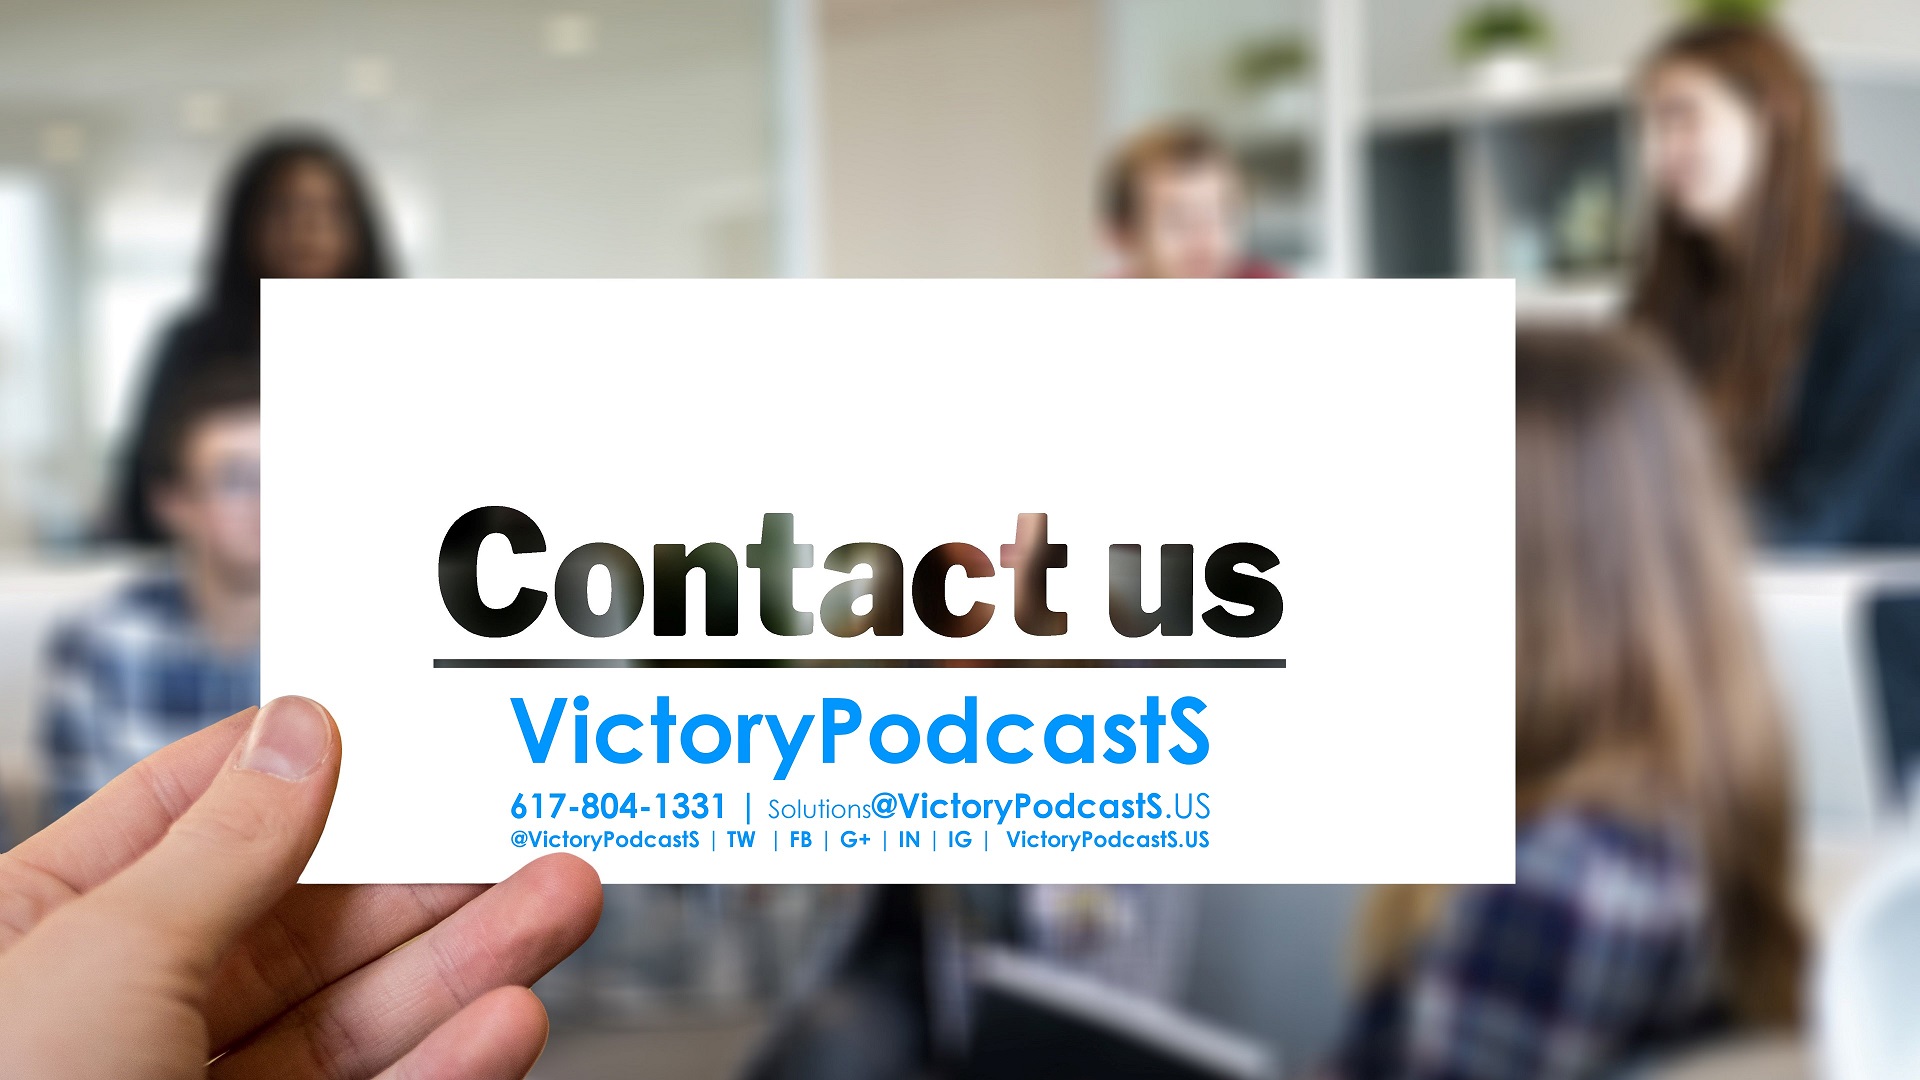 VictoryPodcastS Solutions | by GLAF CONSULTING